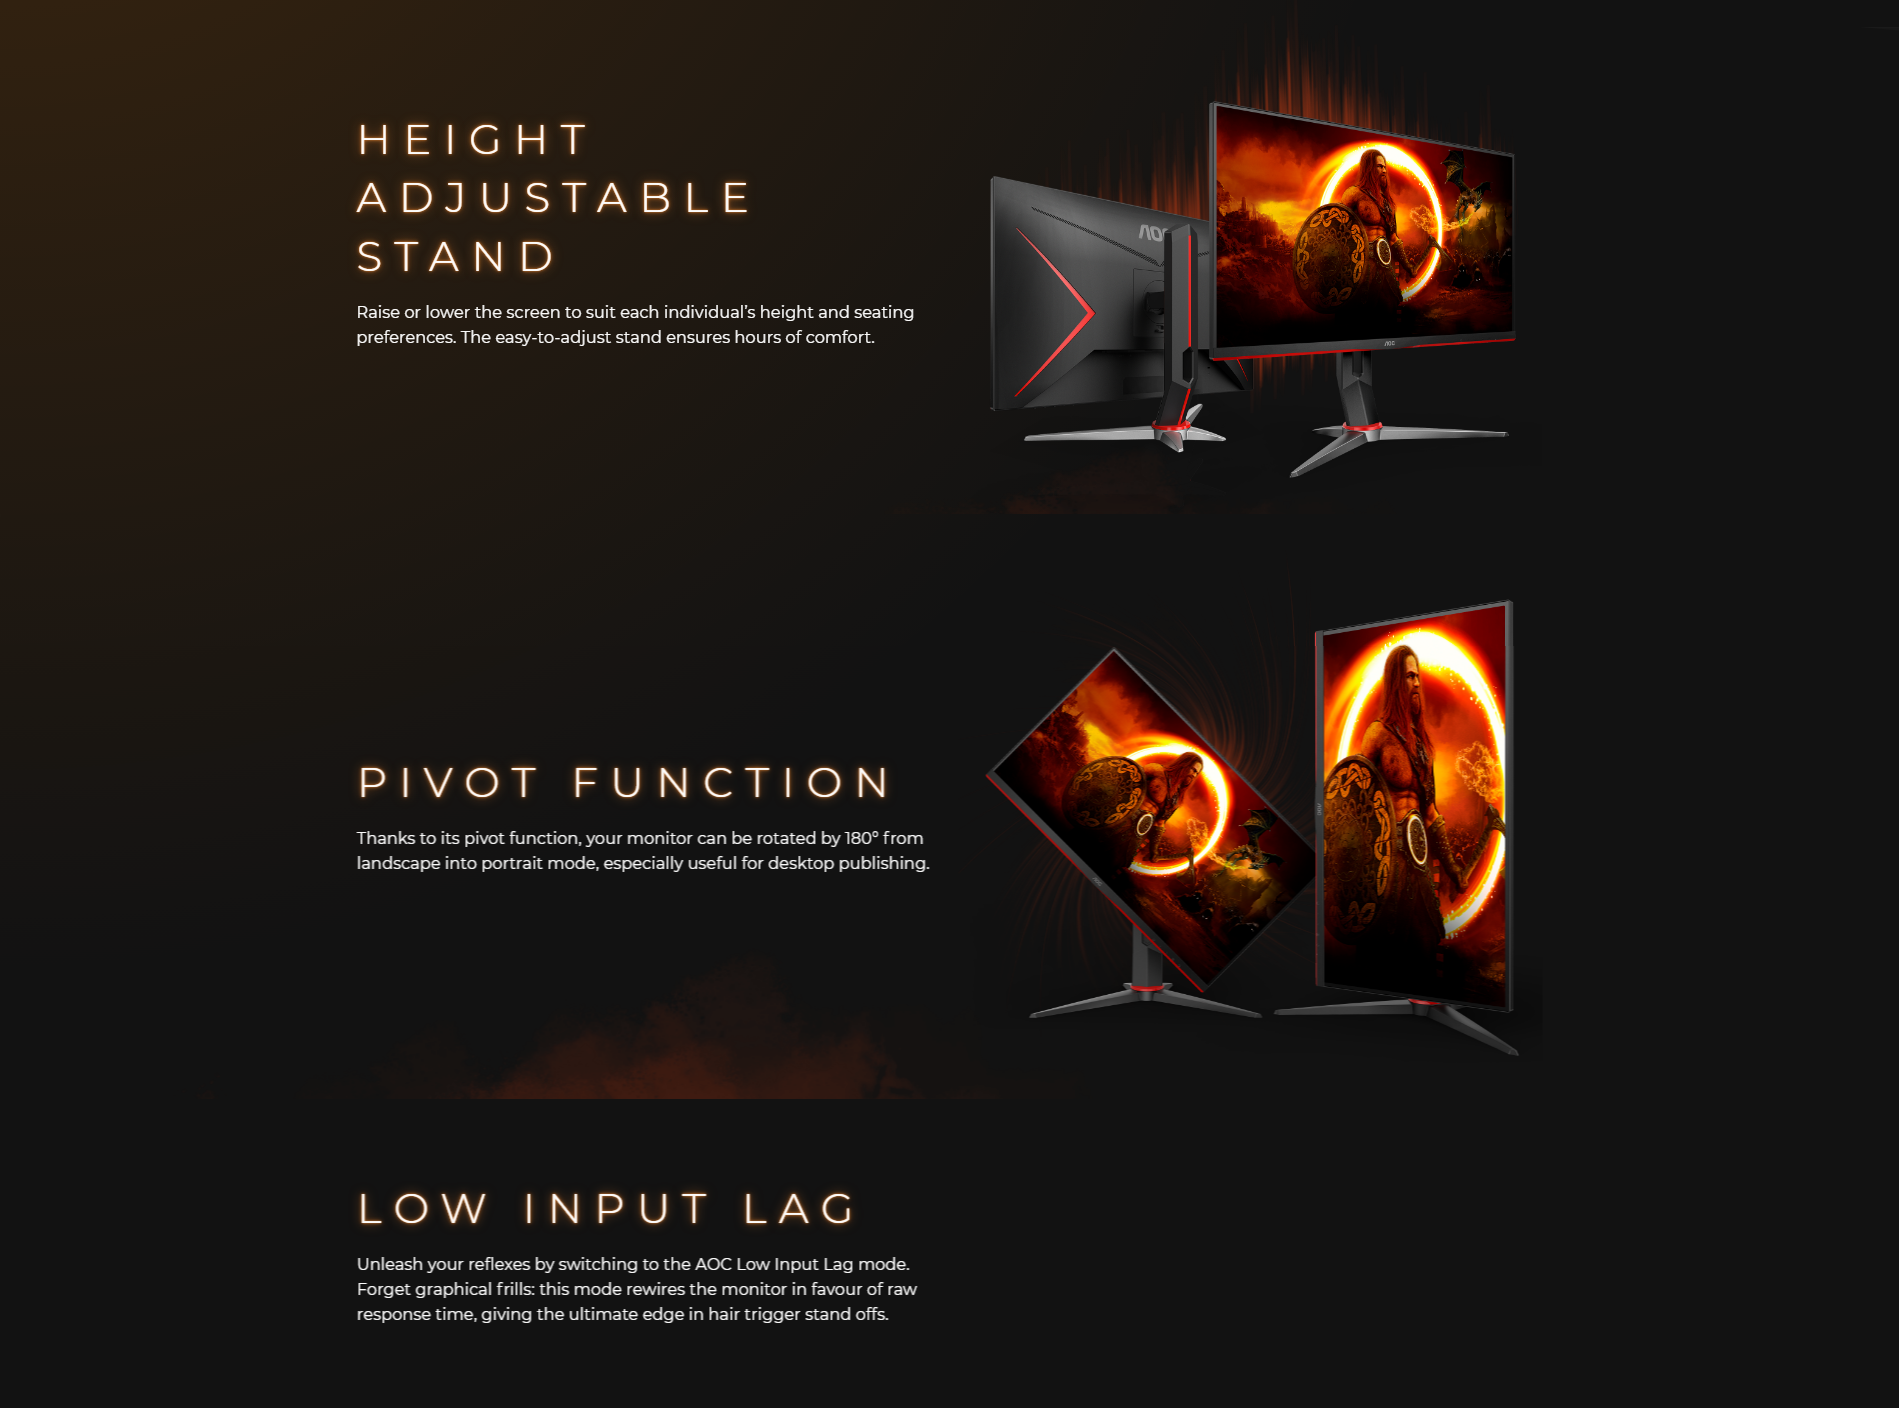 A large marketing image providing additional information about the product AOC Gaming Q27G2S/EU 27" QHD 165Hz IPS Monitor - Additional alt info not provided